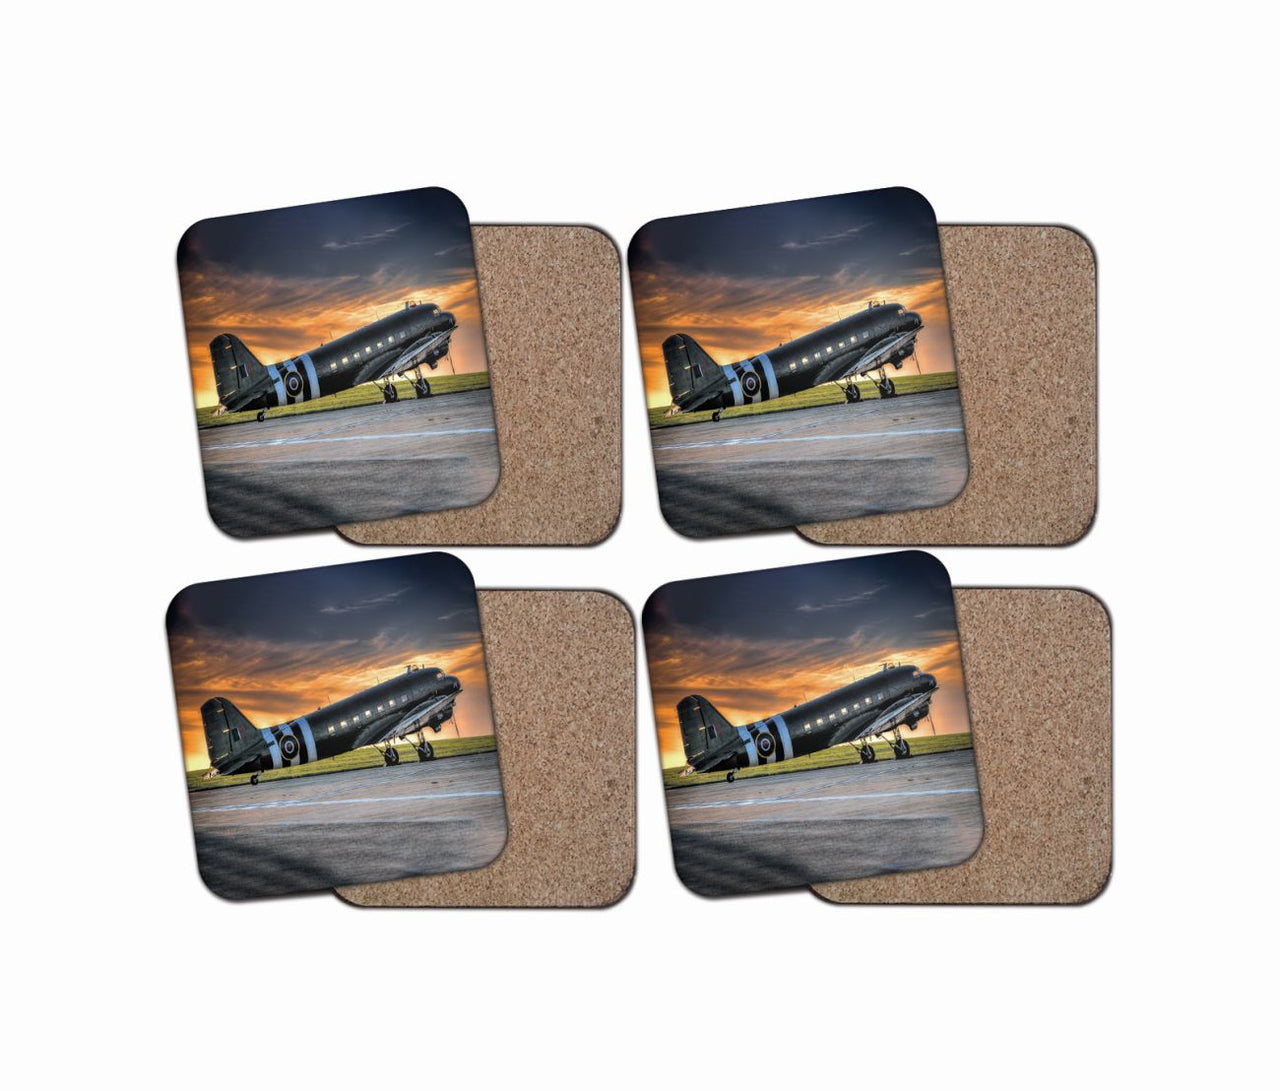 Old Airplane Parked During Sunset Designed Coasters